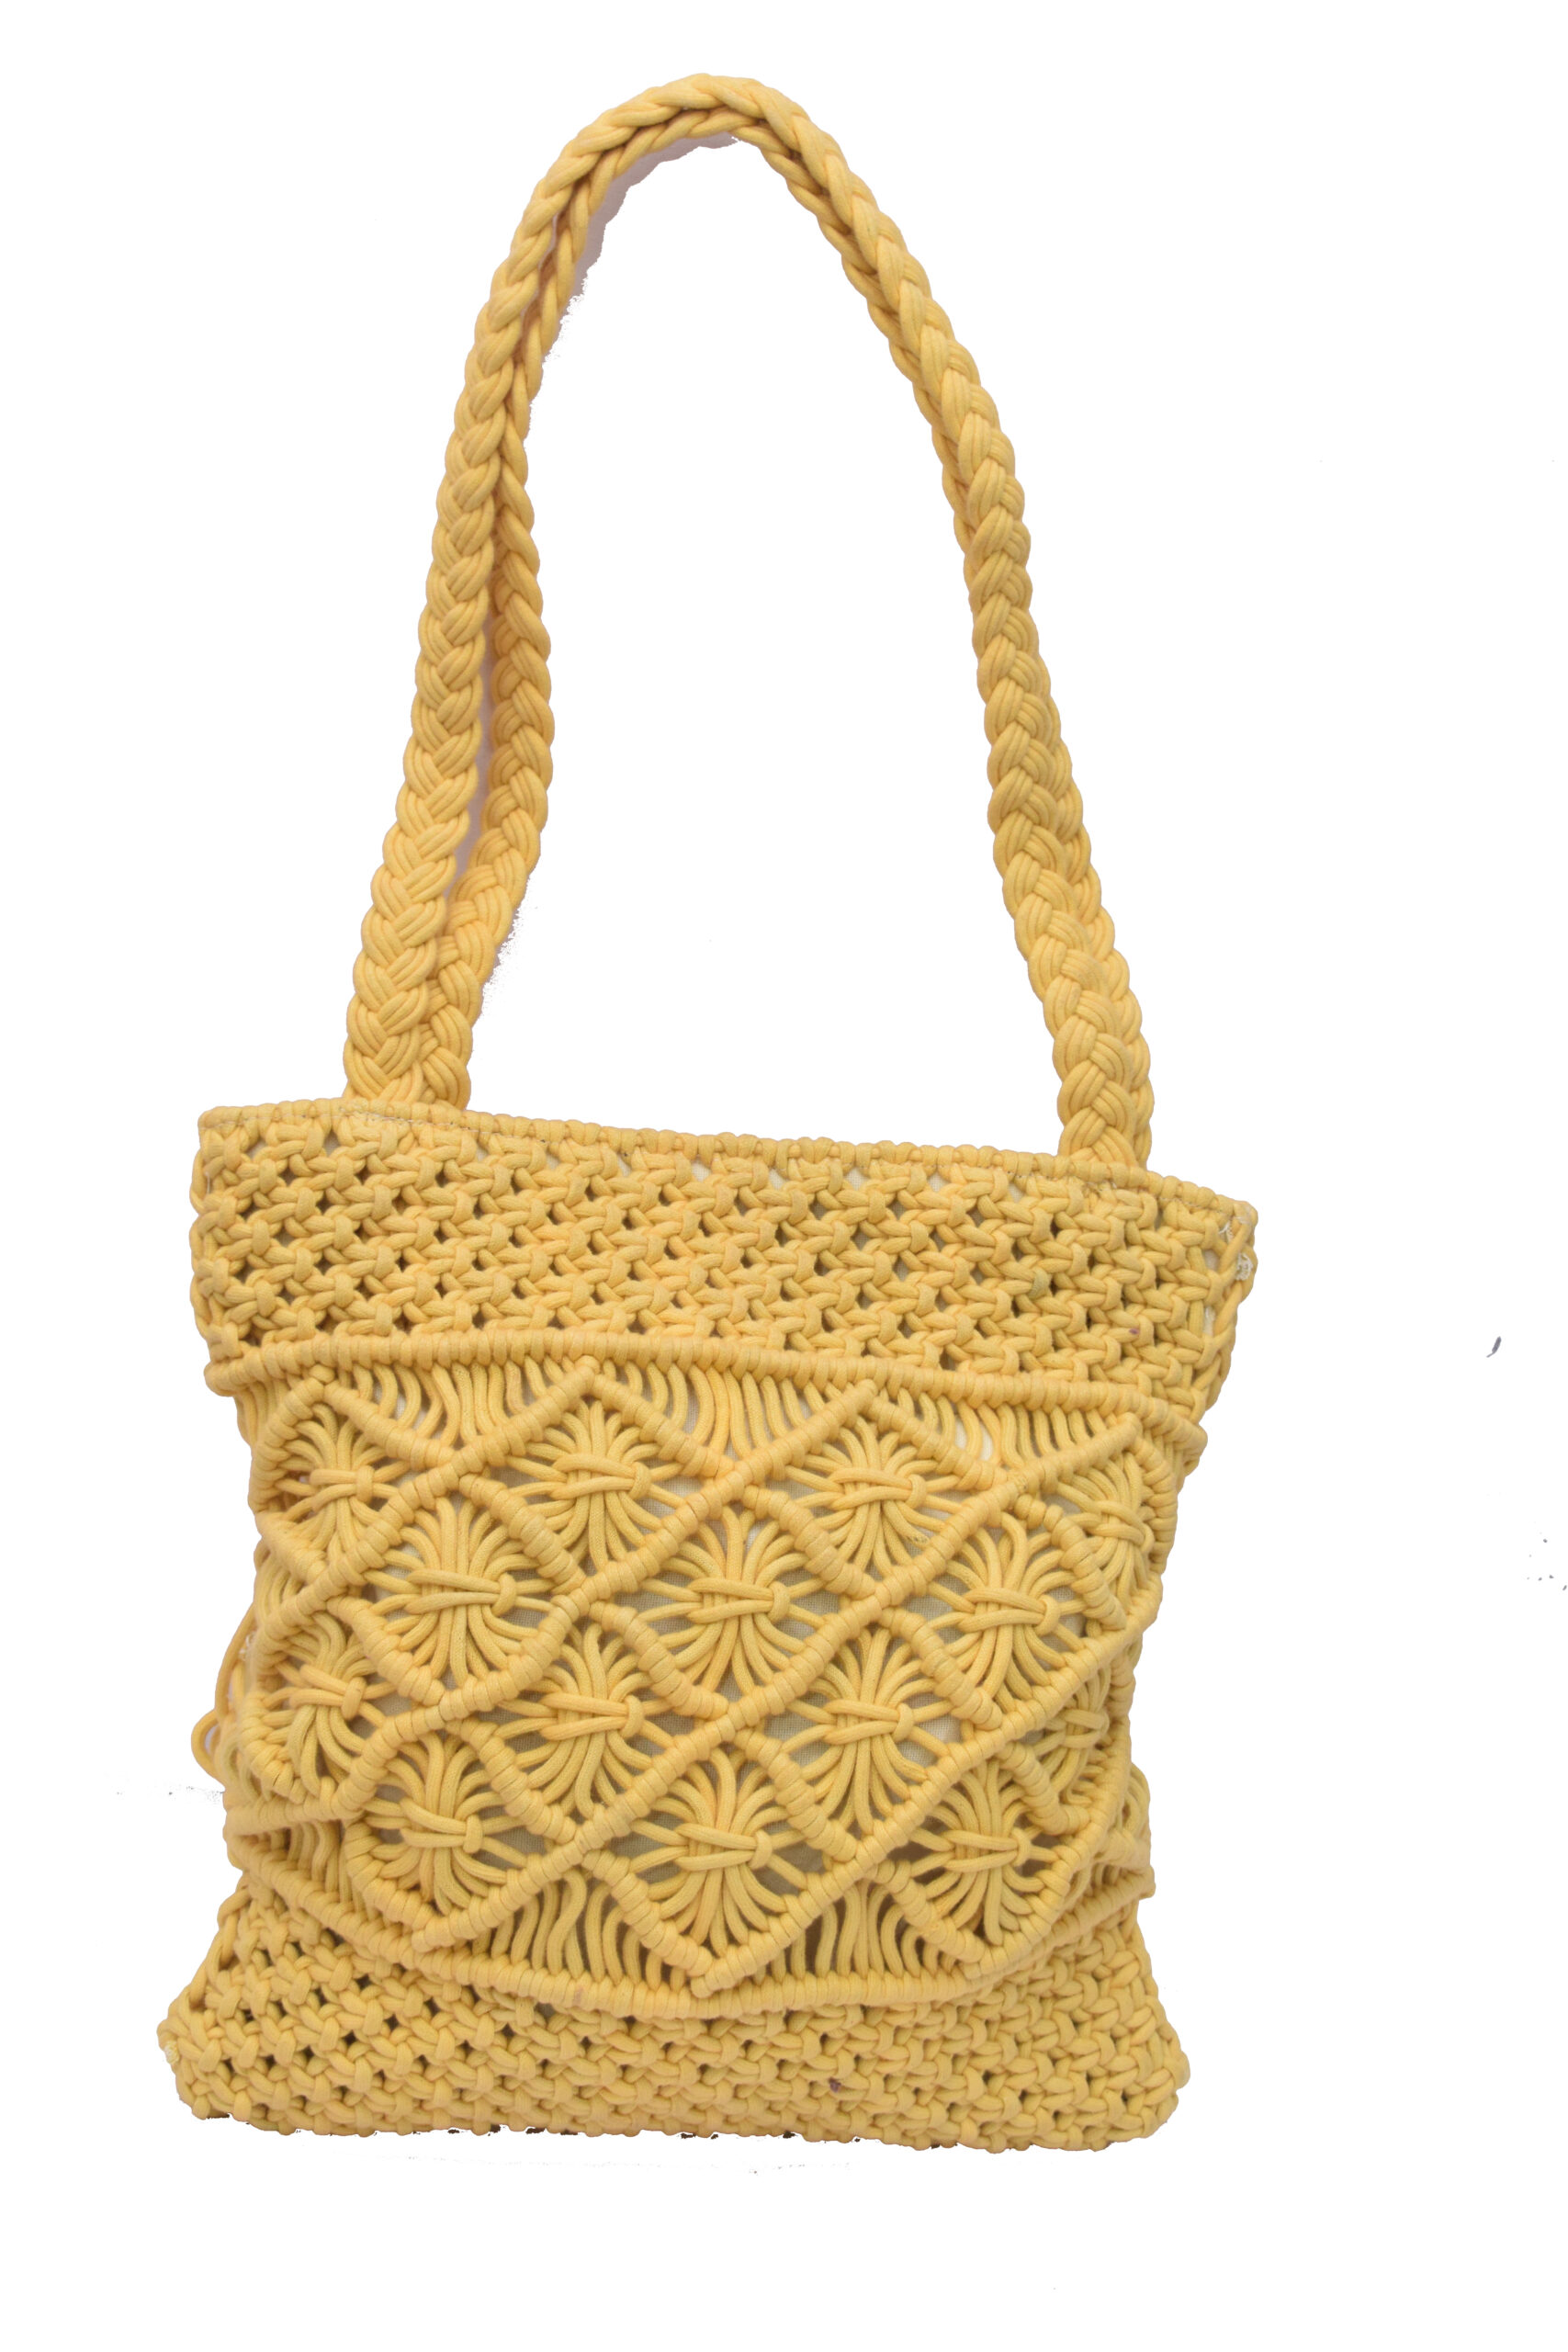 Nisa Handmade Straw Bag Travel Beach Fishing Net Handbag Shopping Woven Shoulder Bag for Women with Stitched Lining Yellow by BTI Engineers